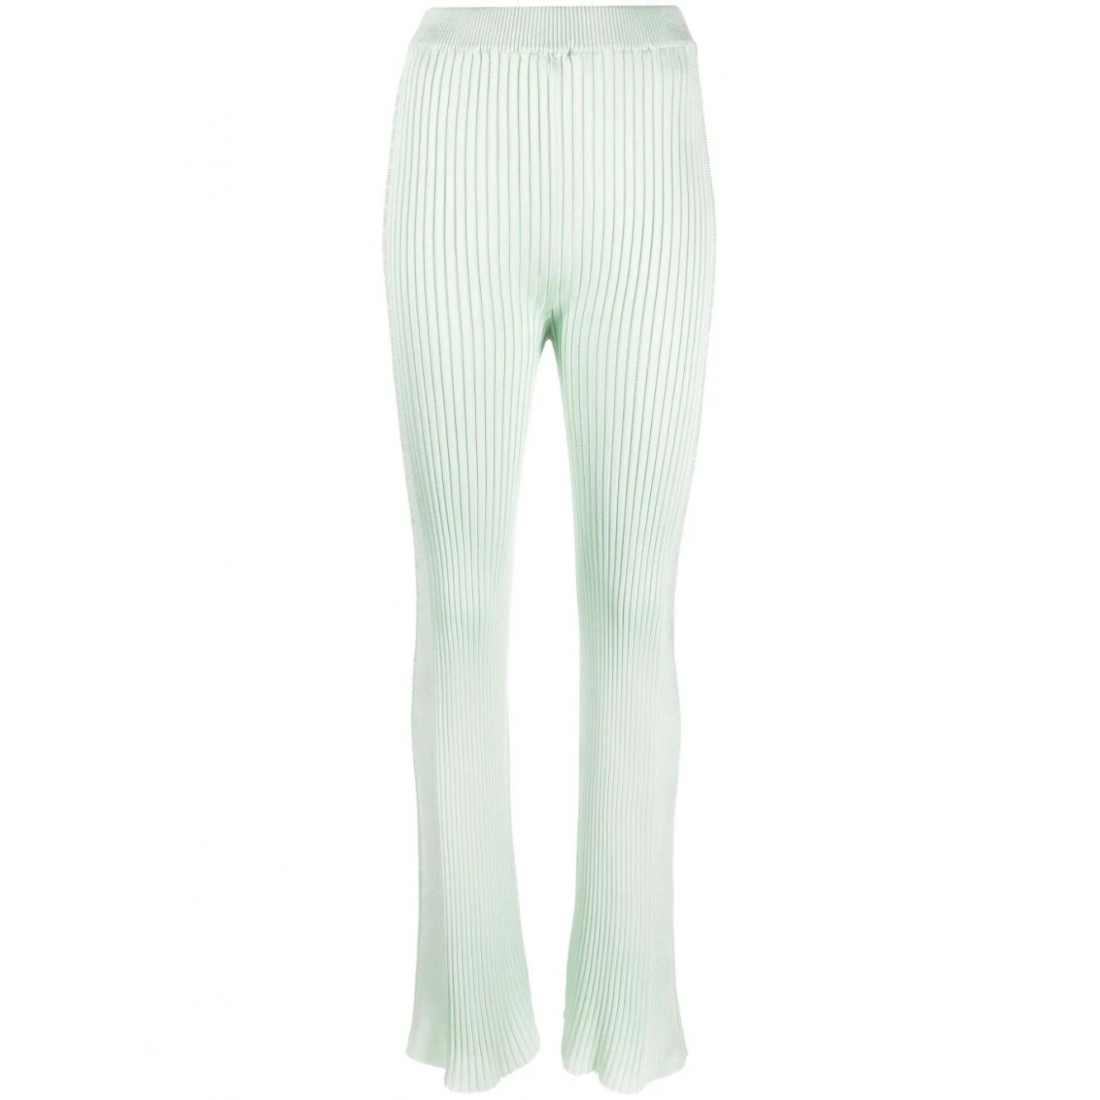 Women's 'Fully Pleated' Trousers